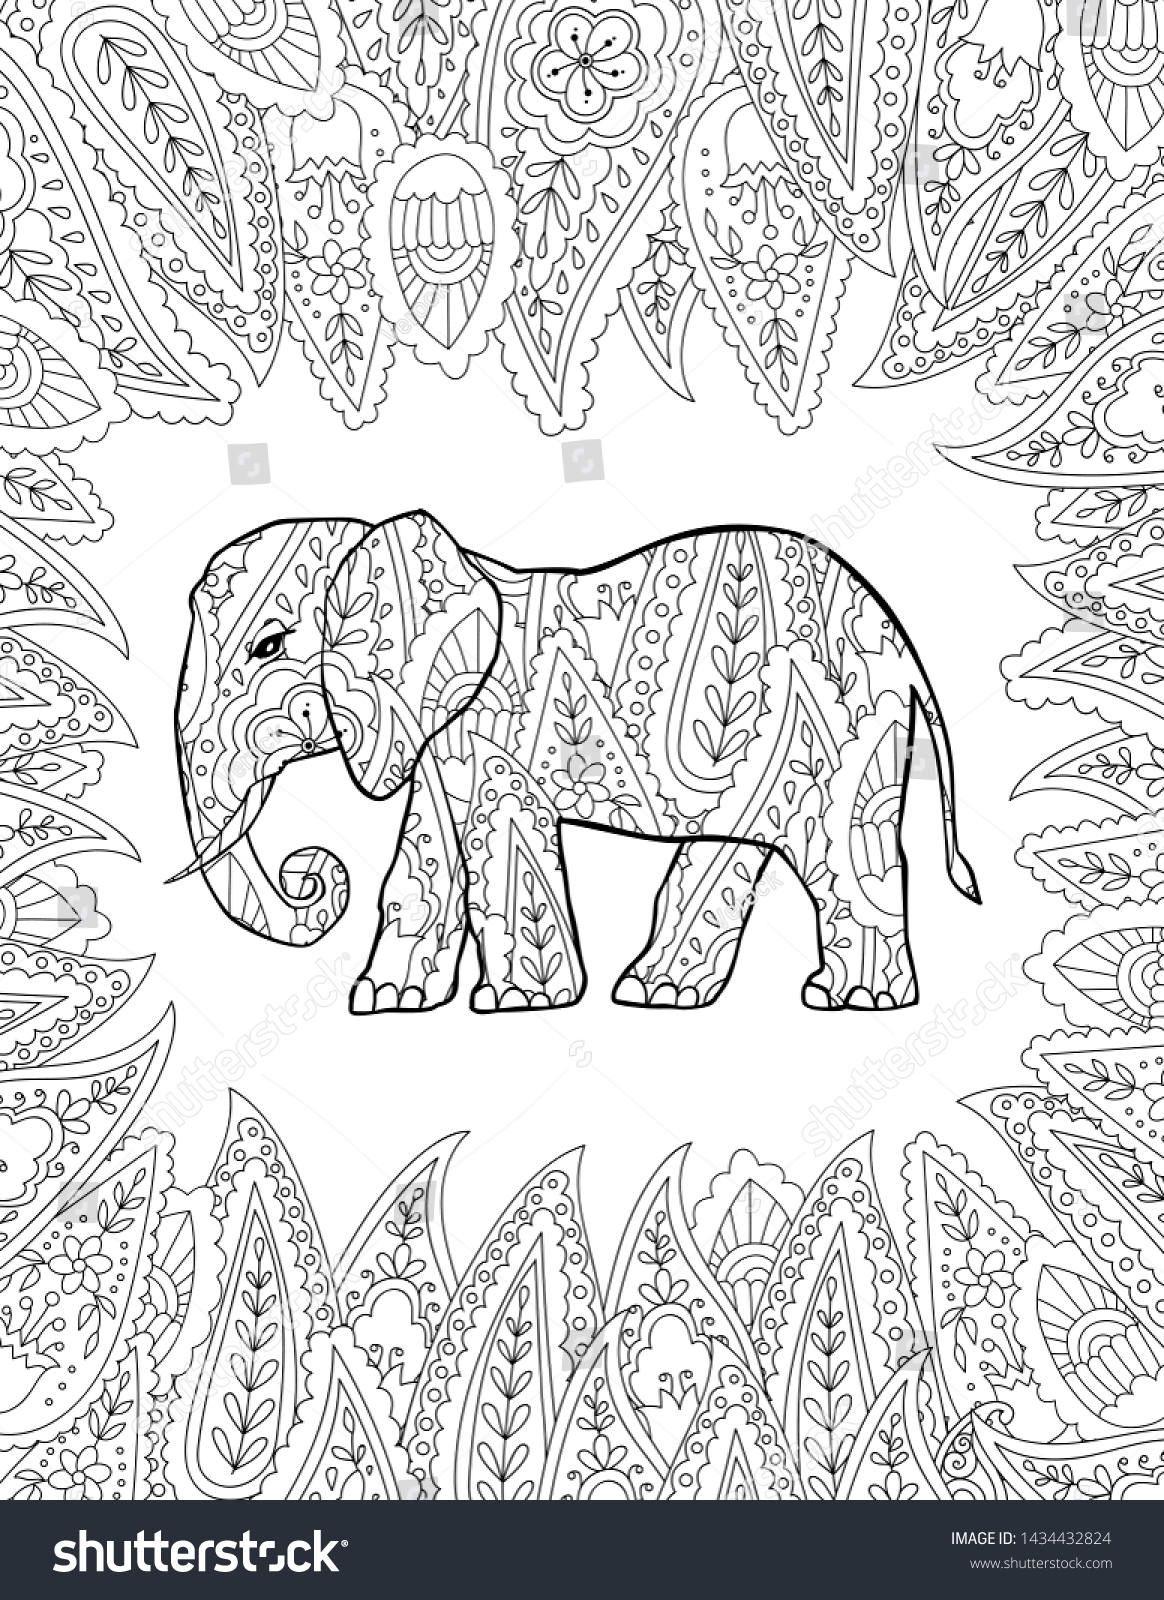 Coloring Page Doodle Style Elephant Zentangle Stock Vector (Royalty ...